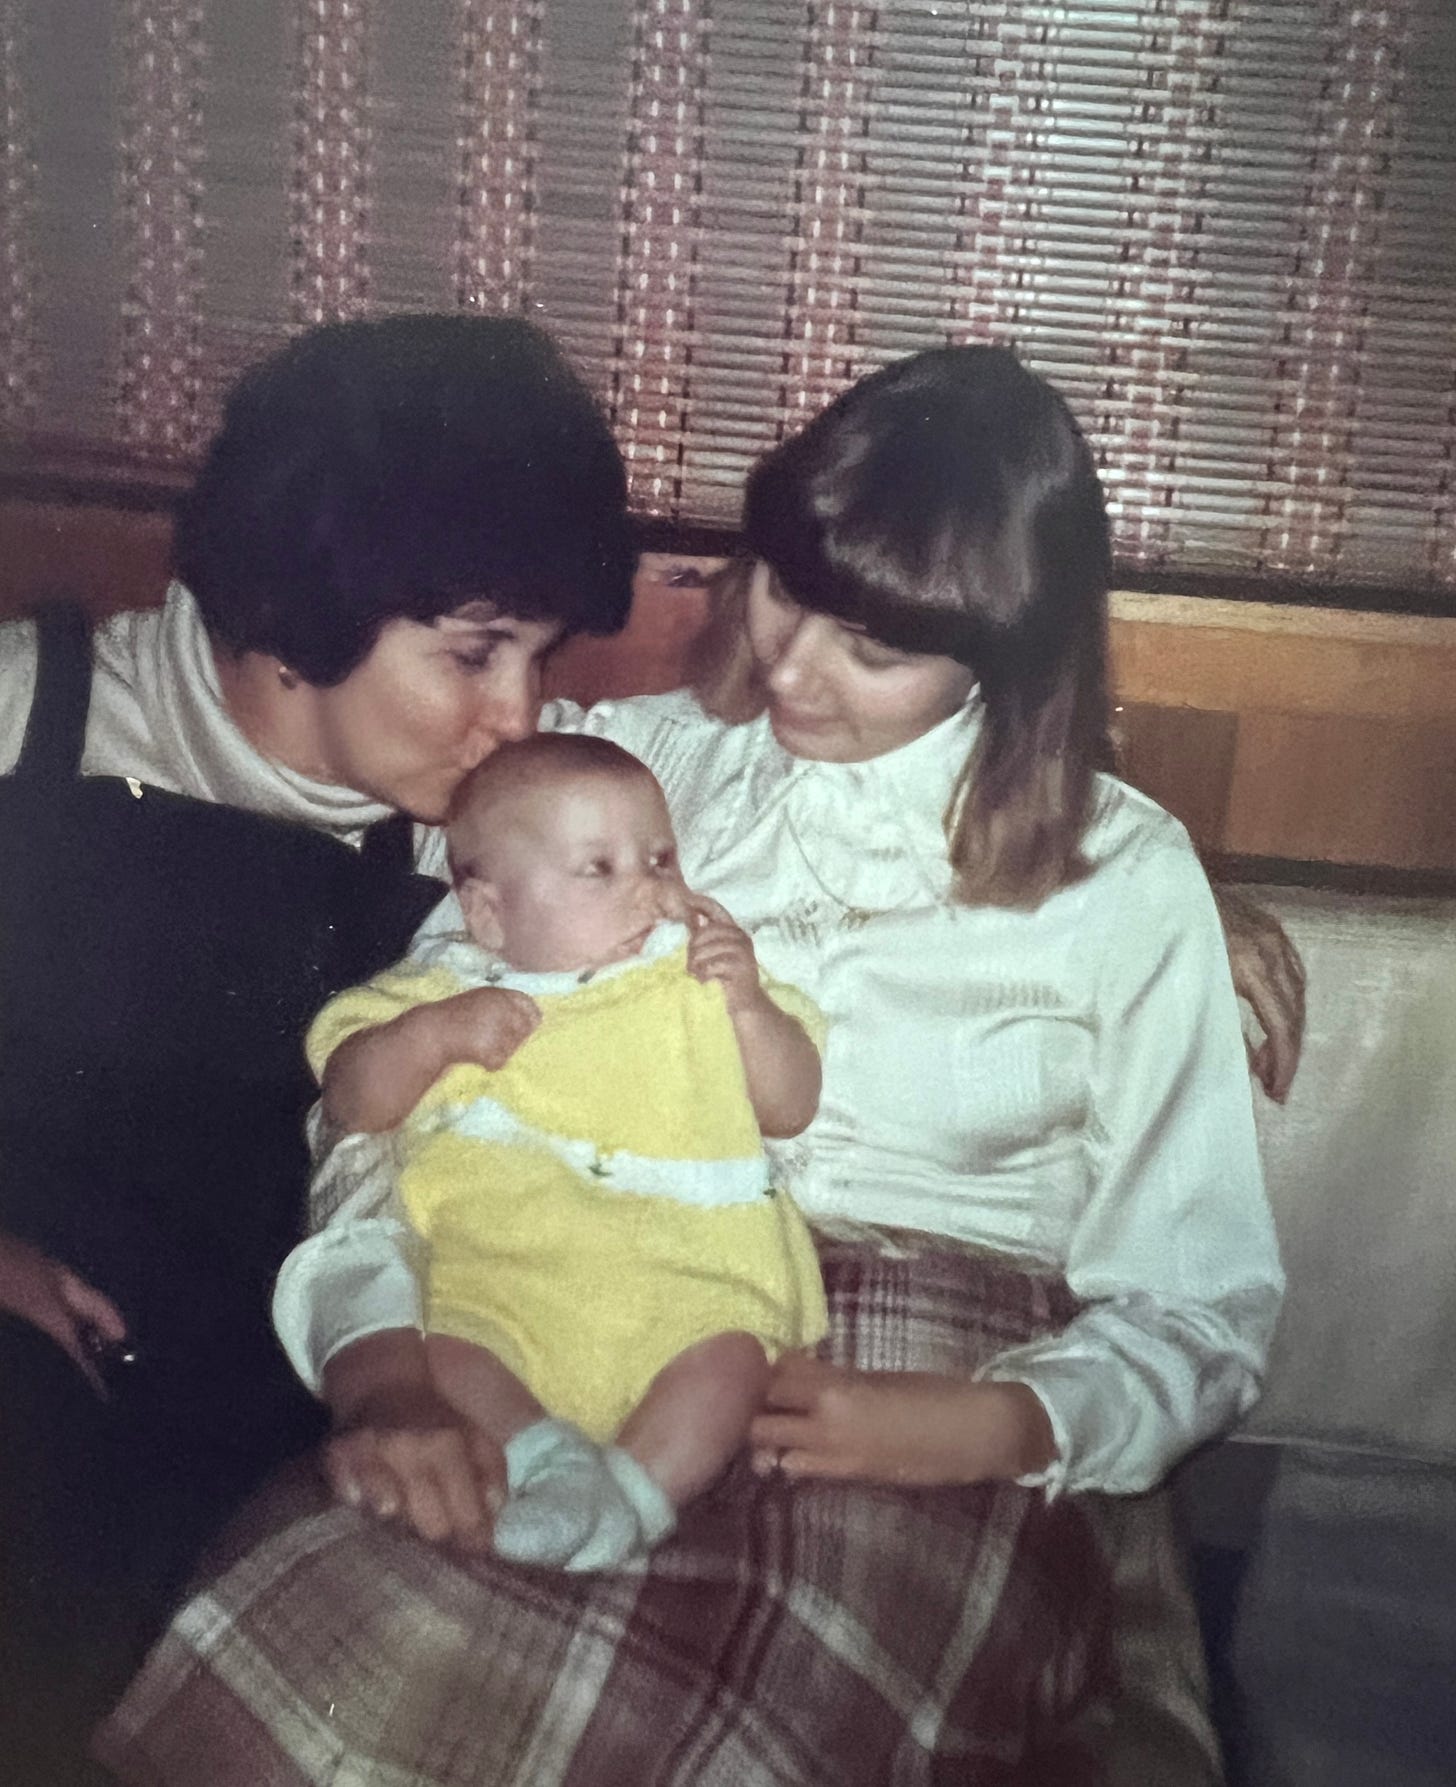 Gram kisses the head of Baby Patty, who is dressed in yellow and held in Mom's lap as Mom looks down at Patty.